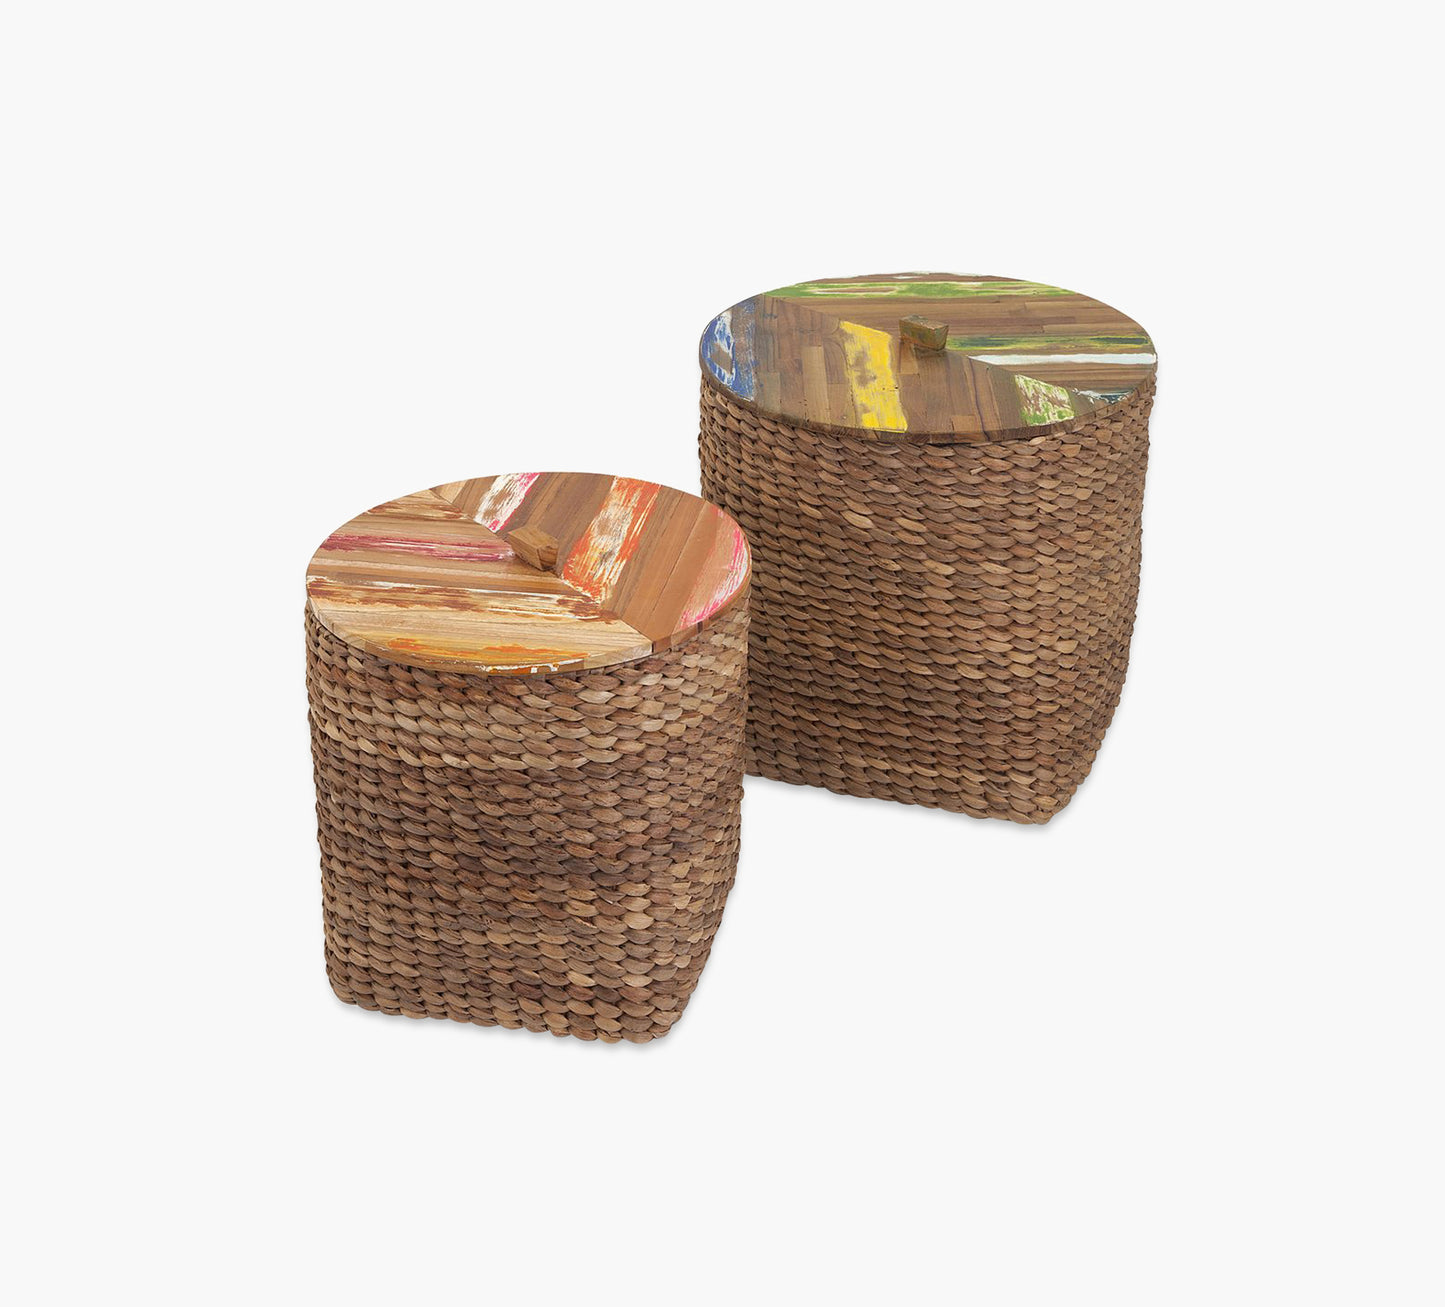 Baskets with Wood Tops